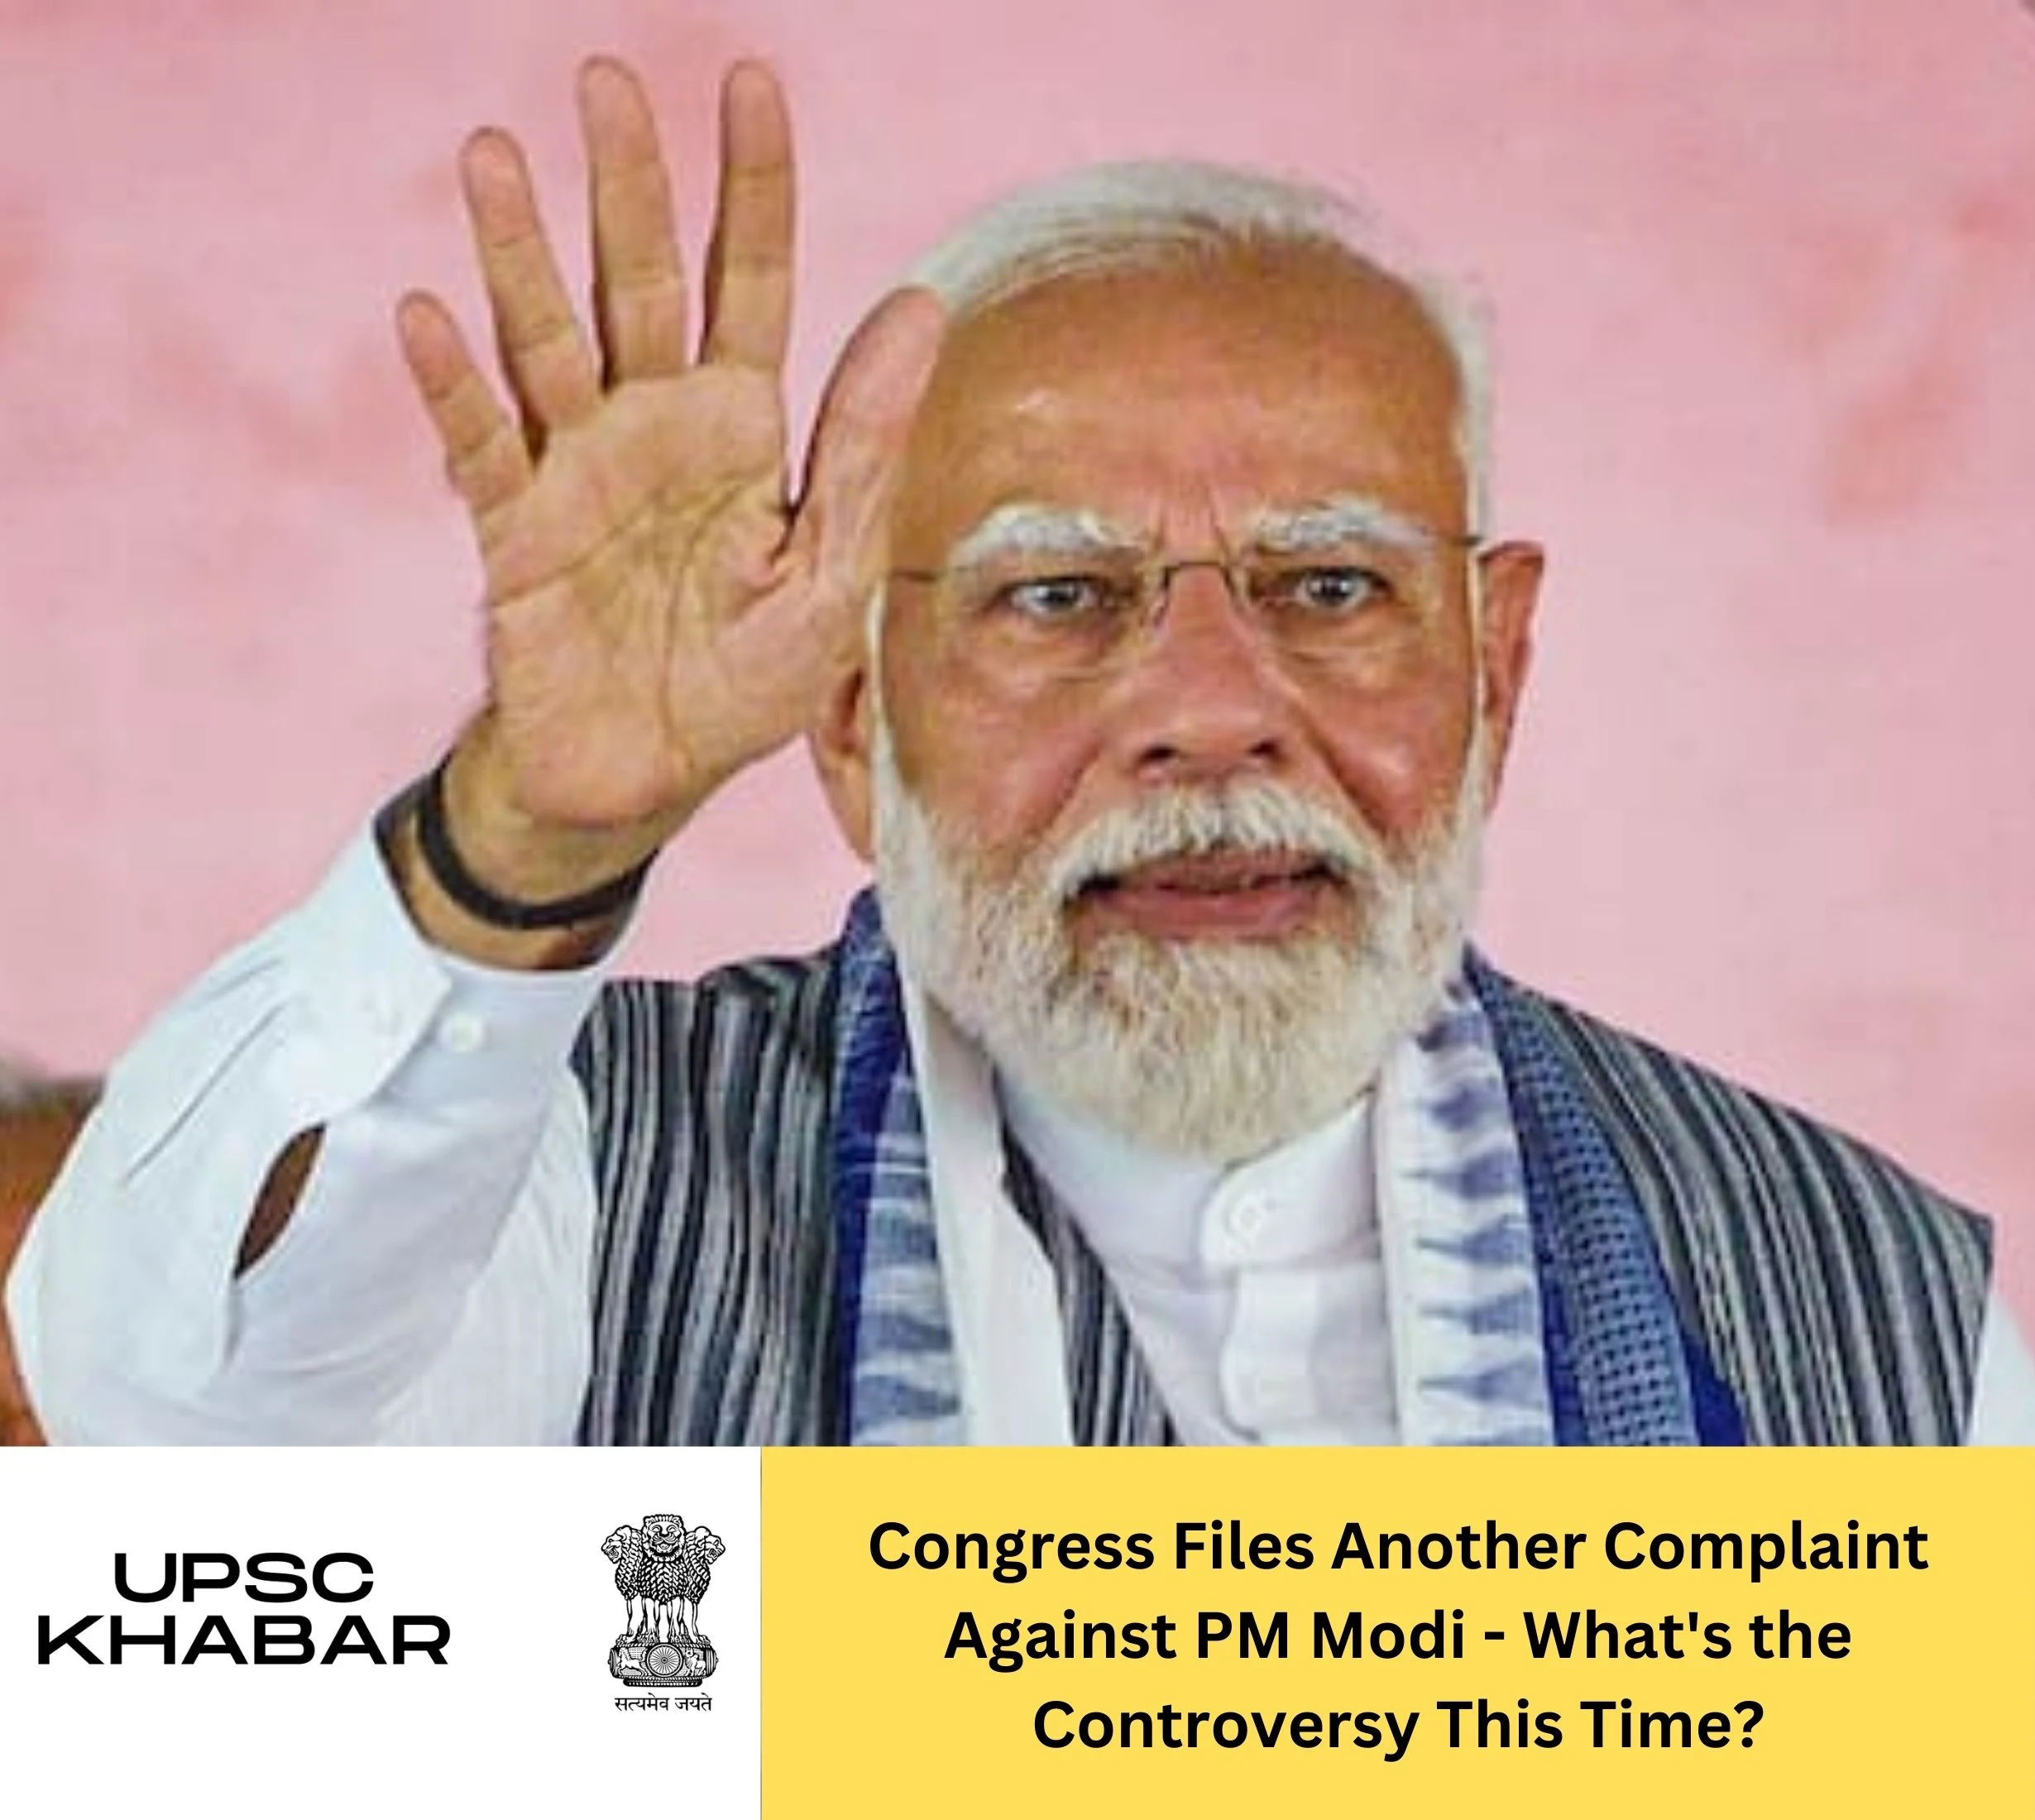 Congress Files Another Complaint Against PM Modi - What's the Controversy This Time?